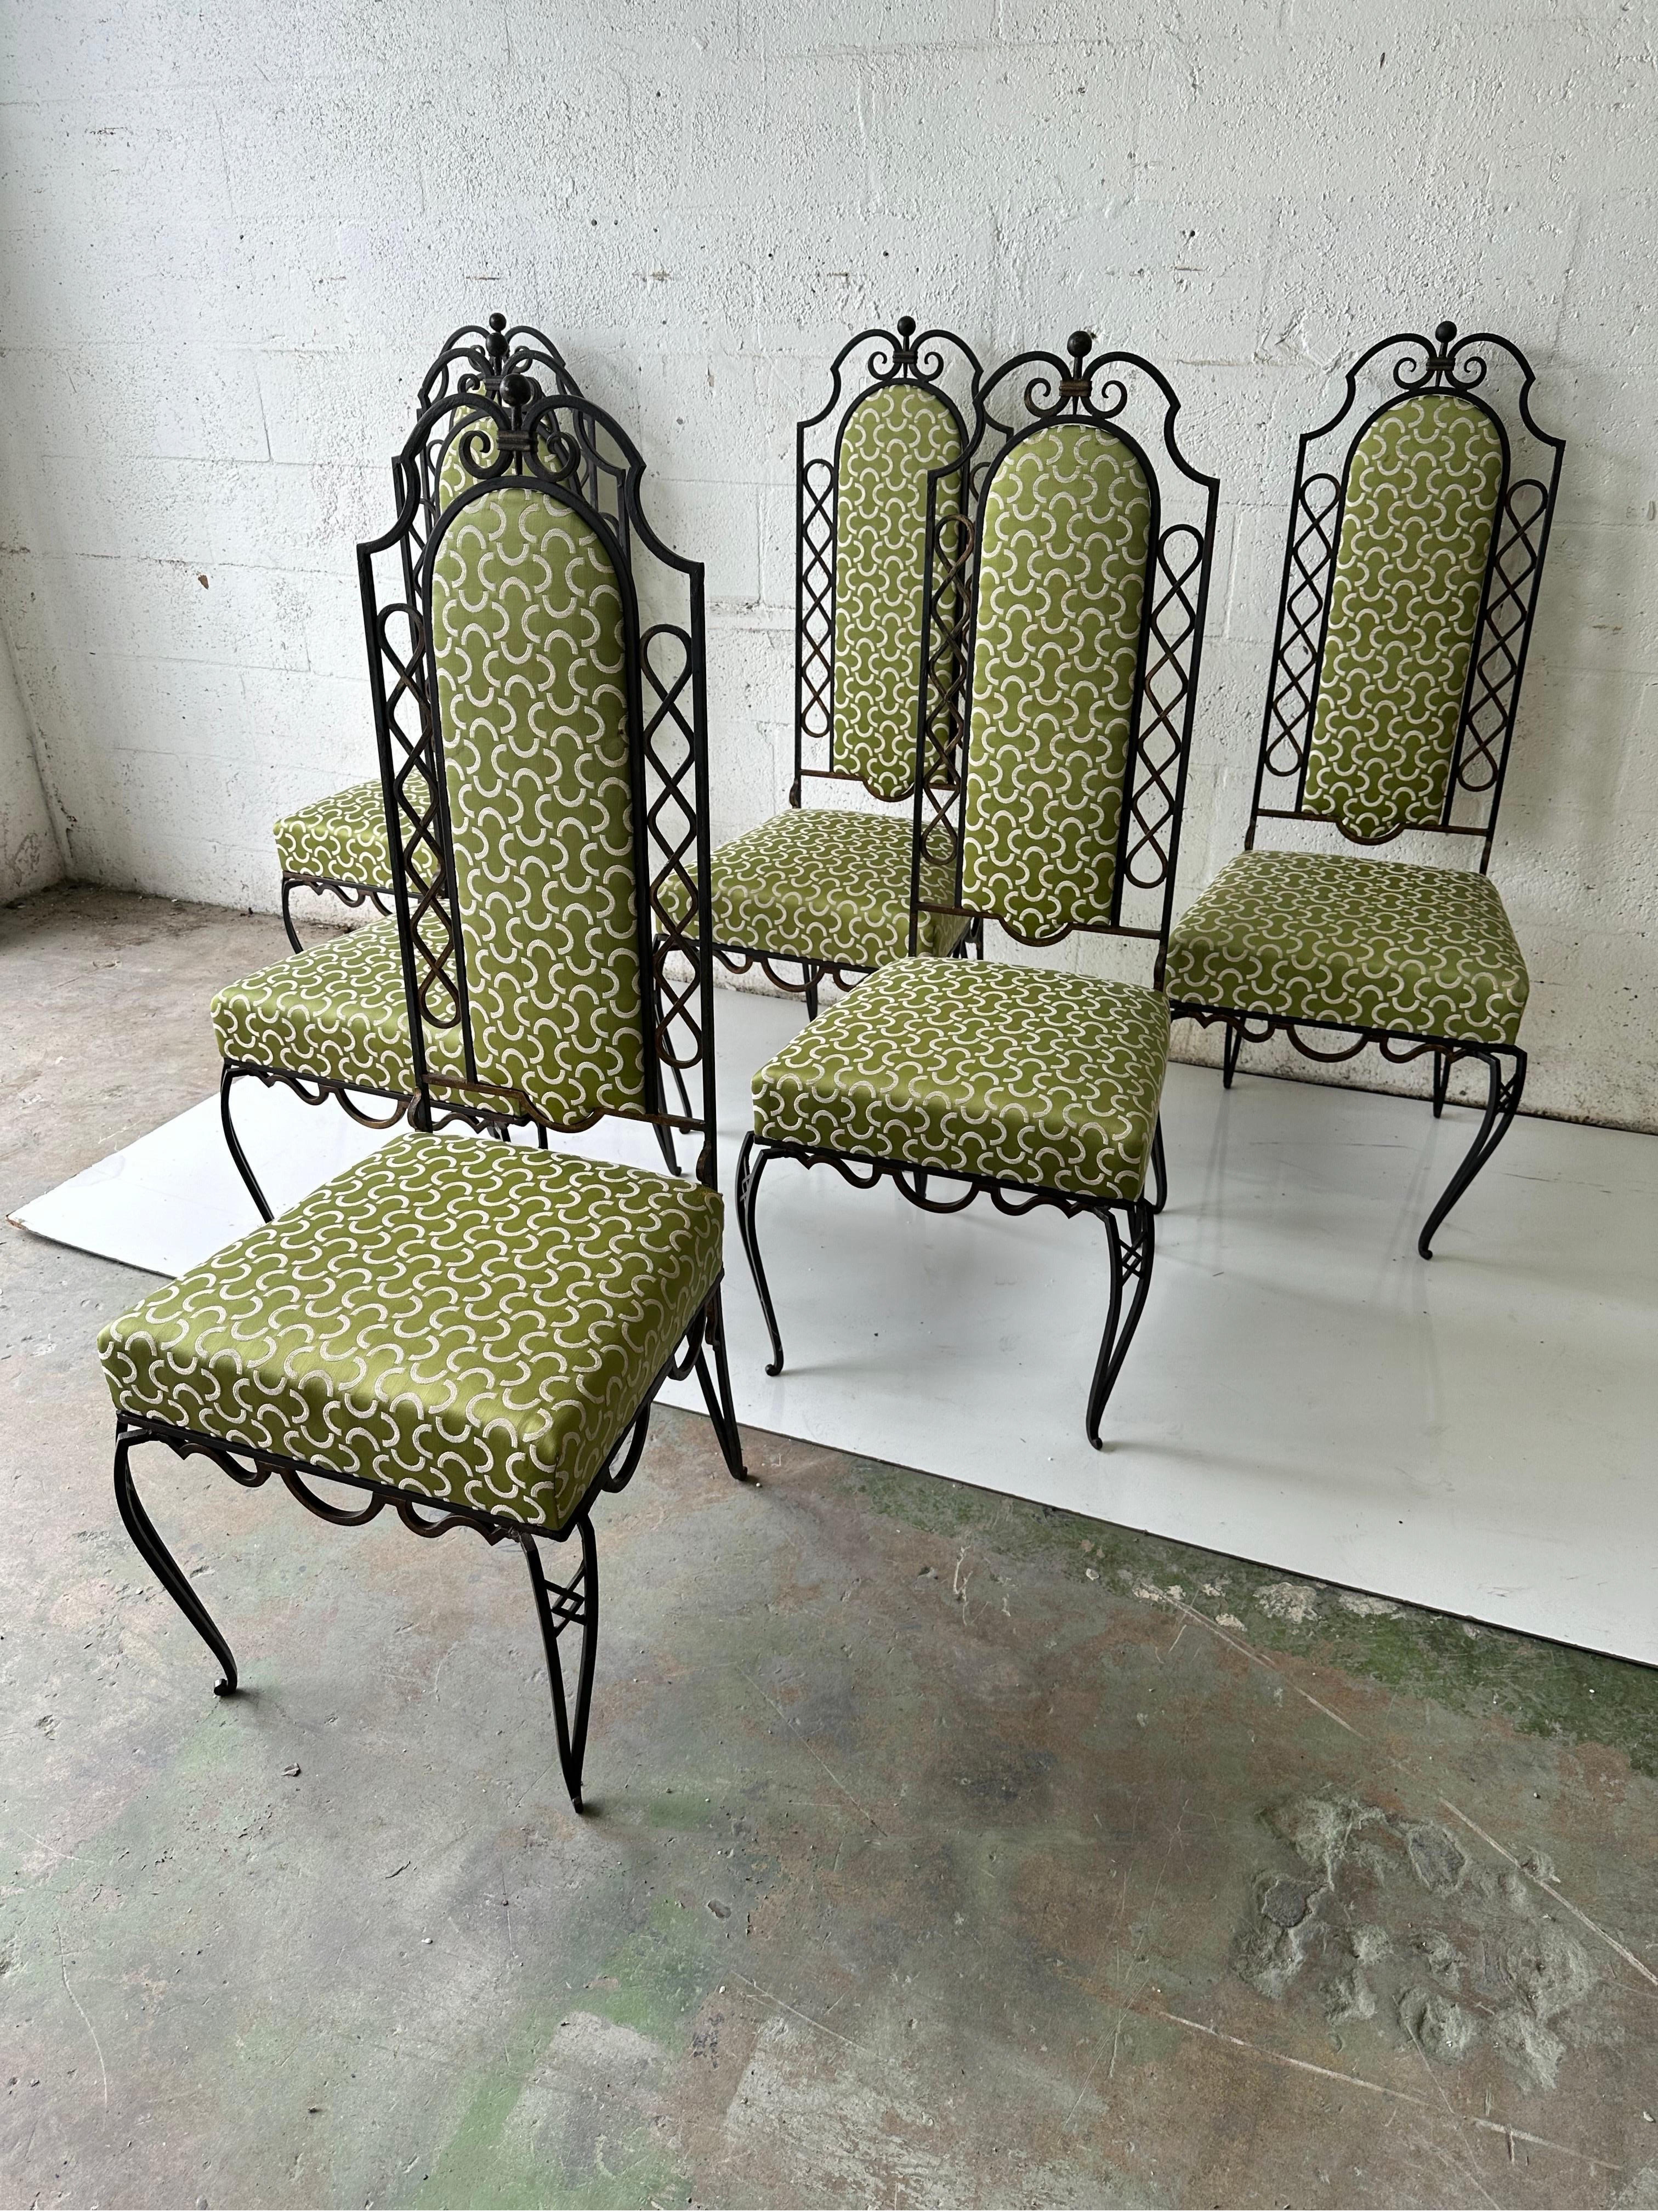 Set of 6 Rene Prou wrought iron high back  chair .
Heavy and sturdy.